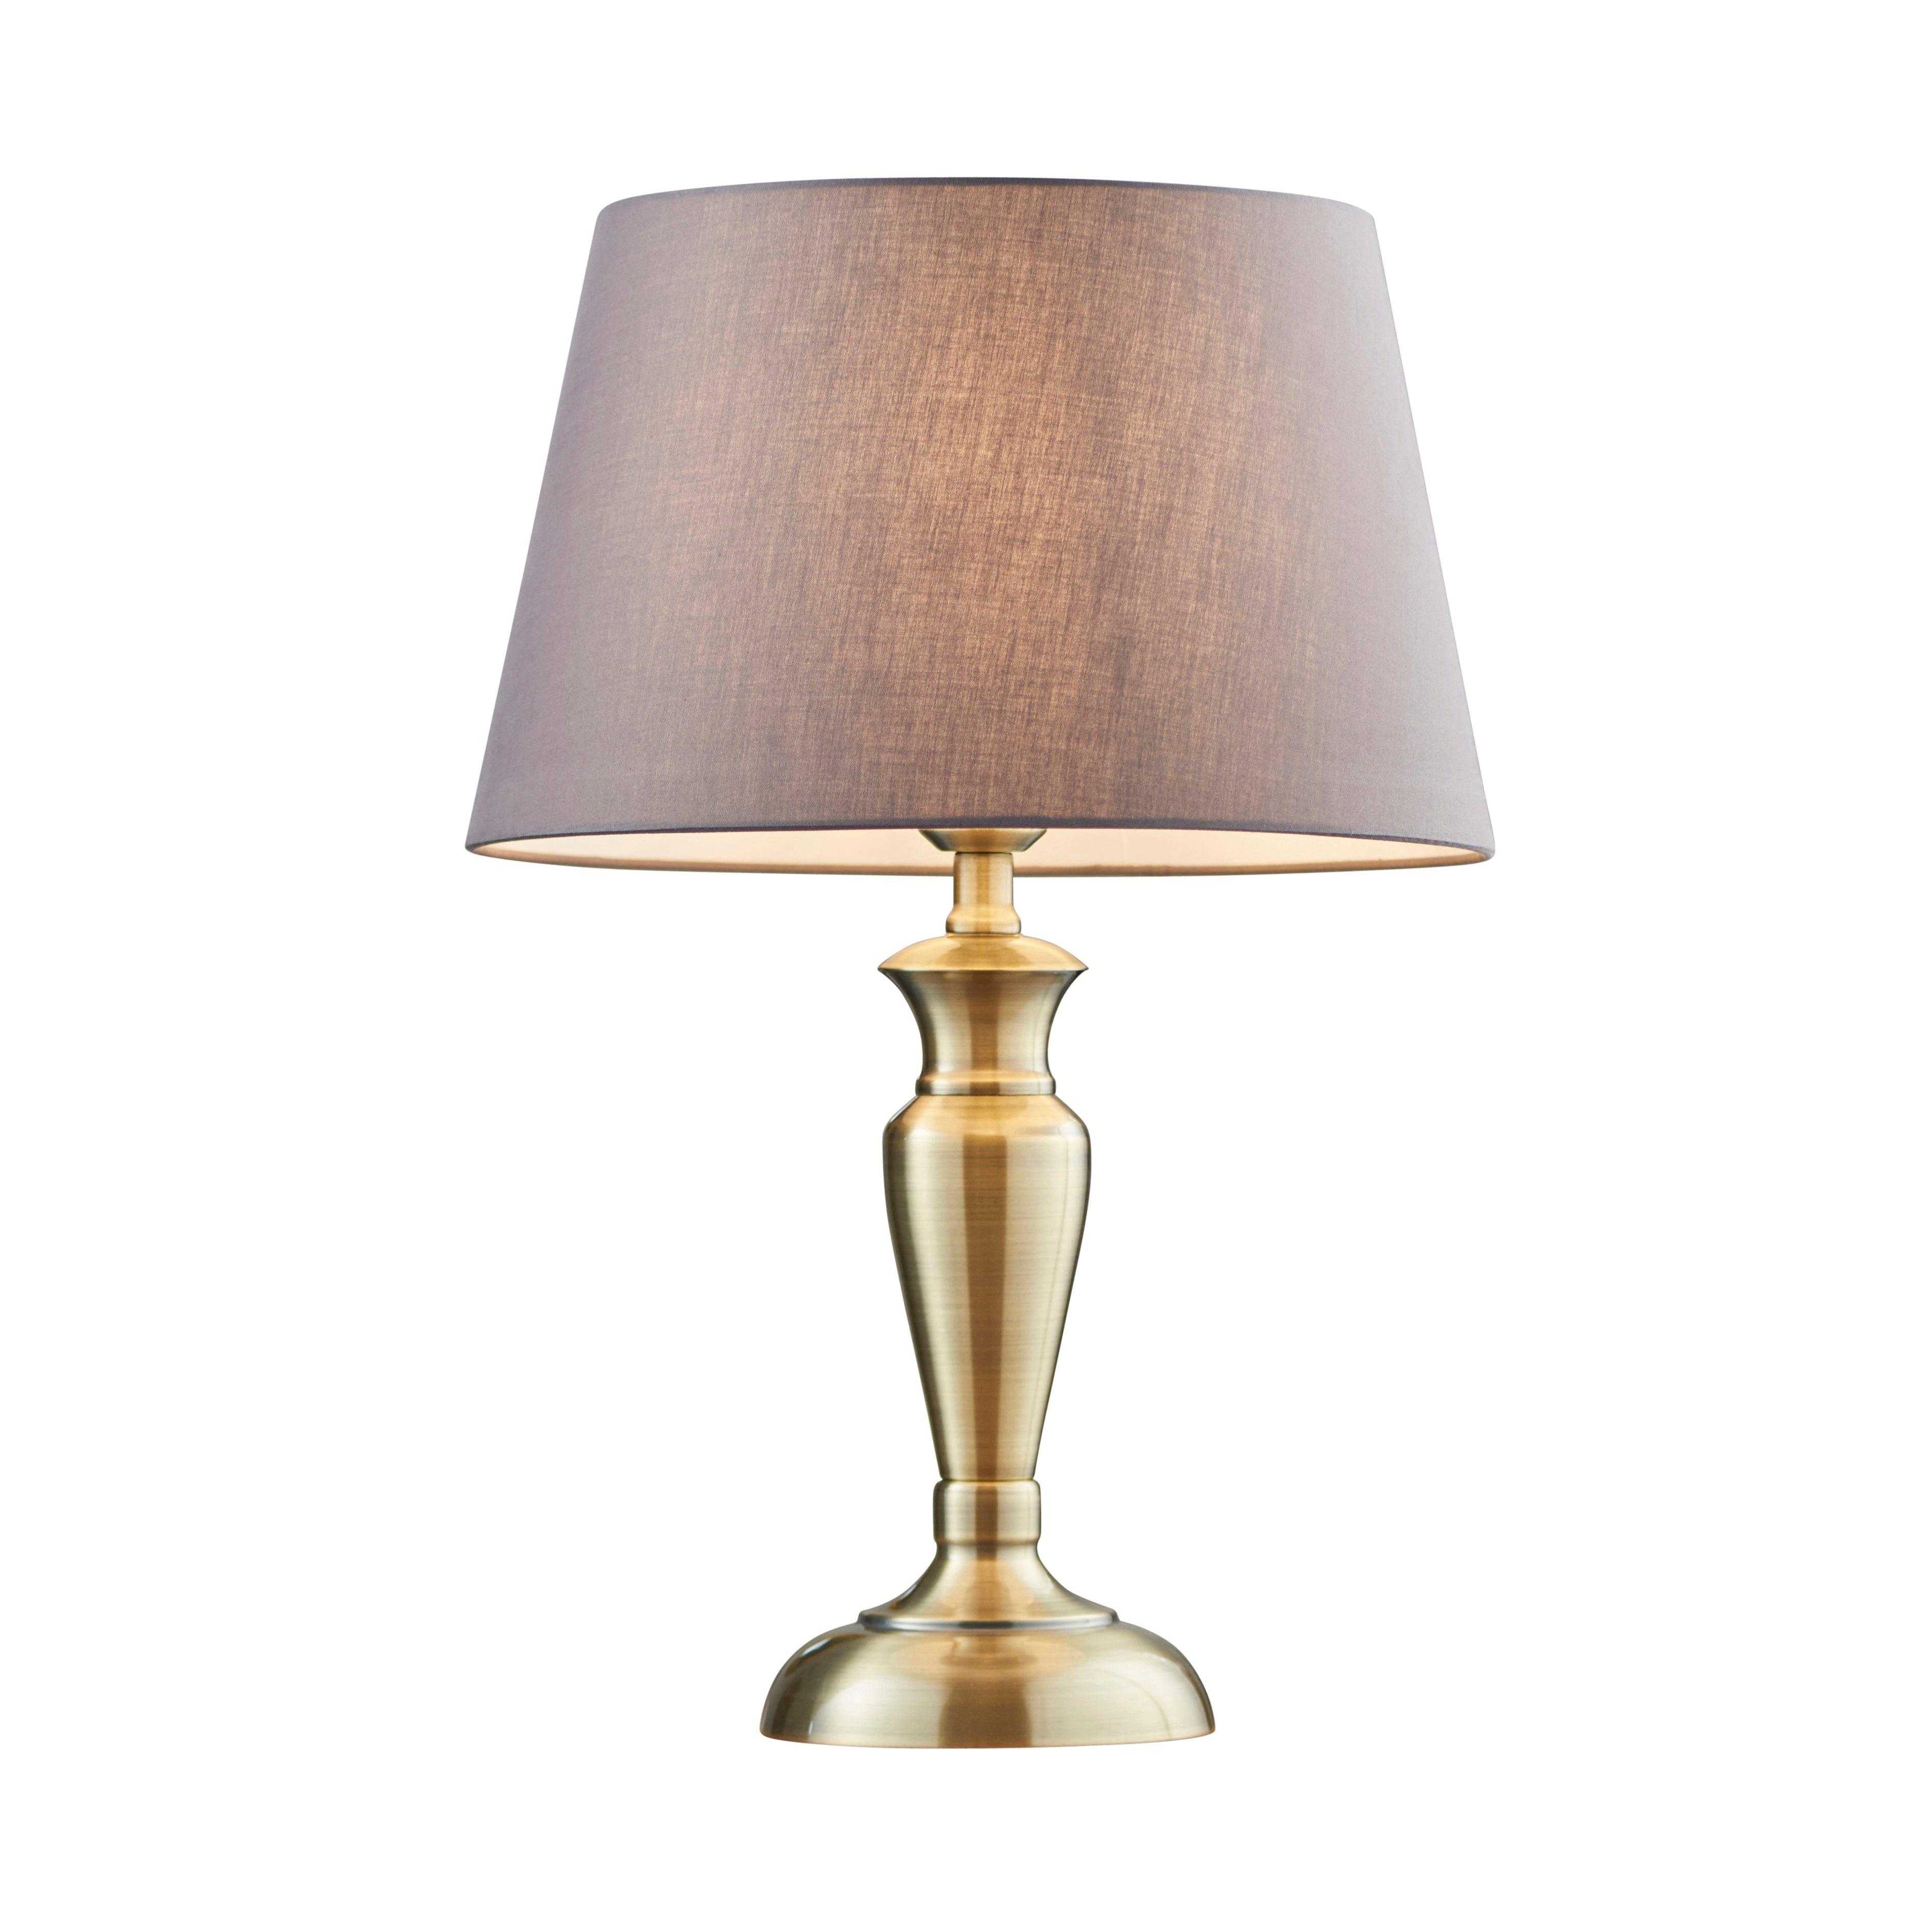 Table Lamp Antique Brass & Charcoal Grey Cotton 60W E27 Bedside Light